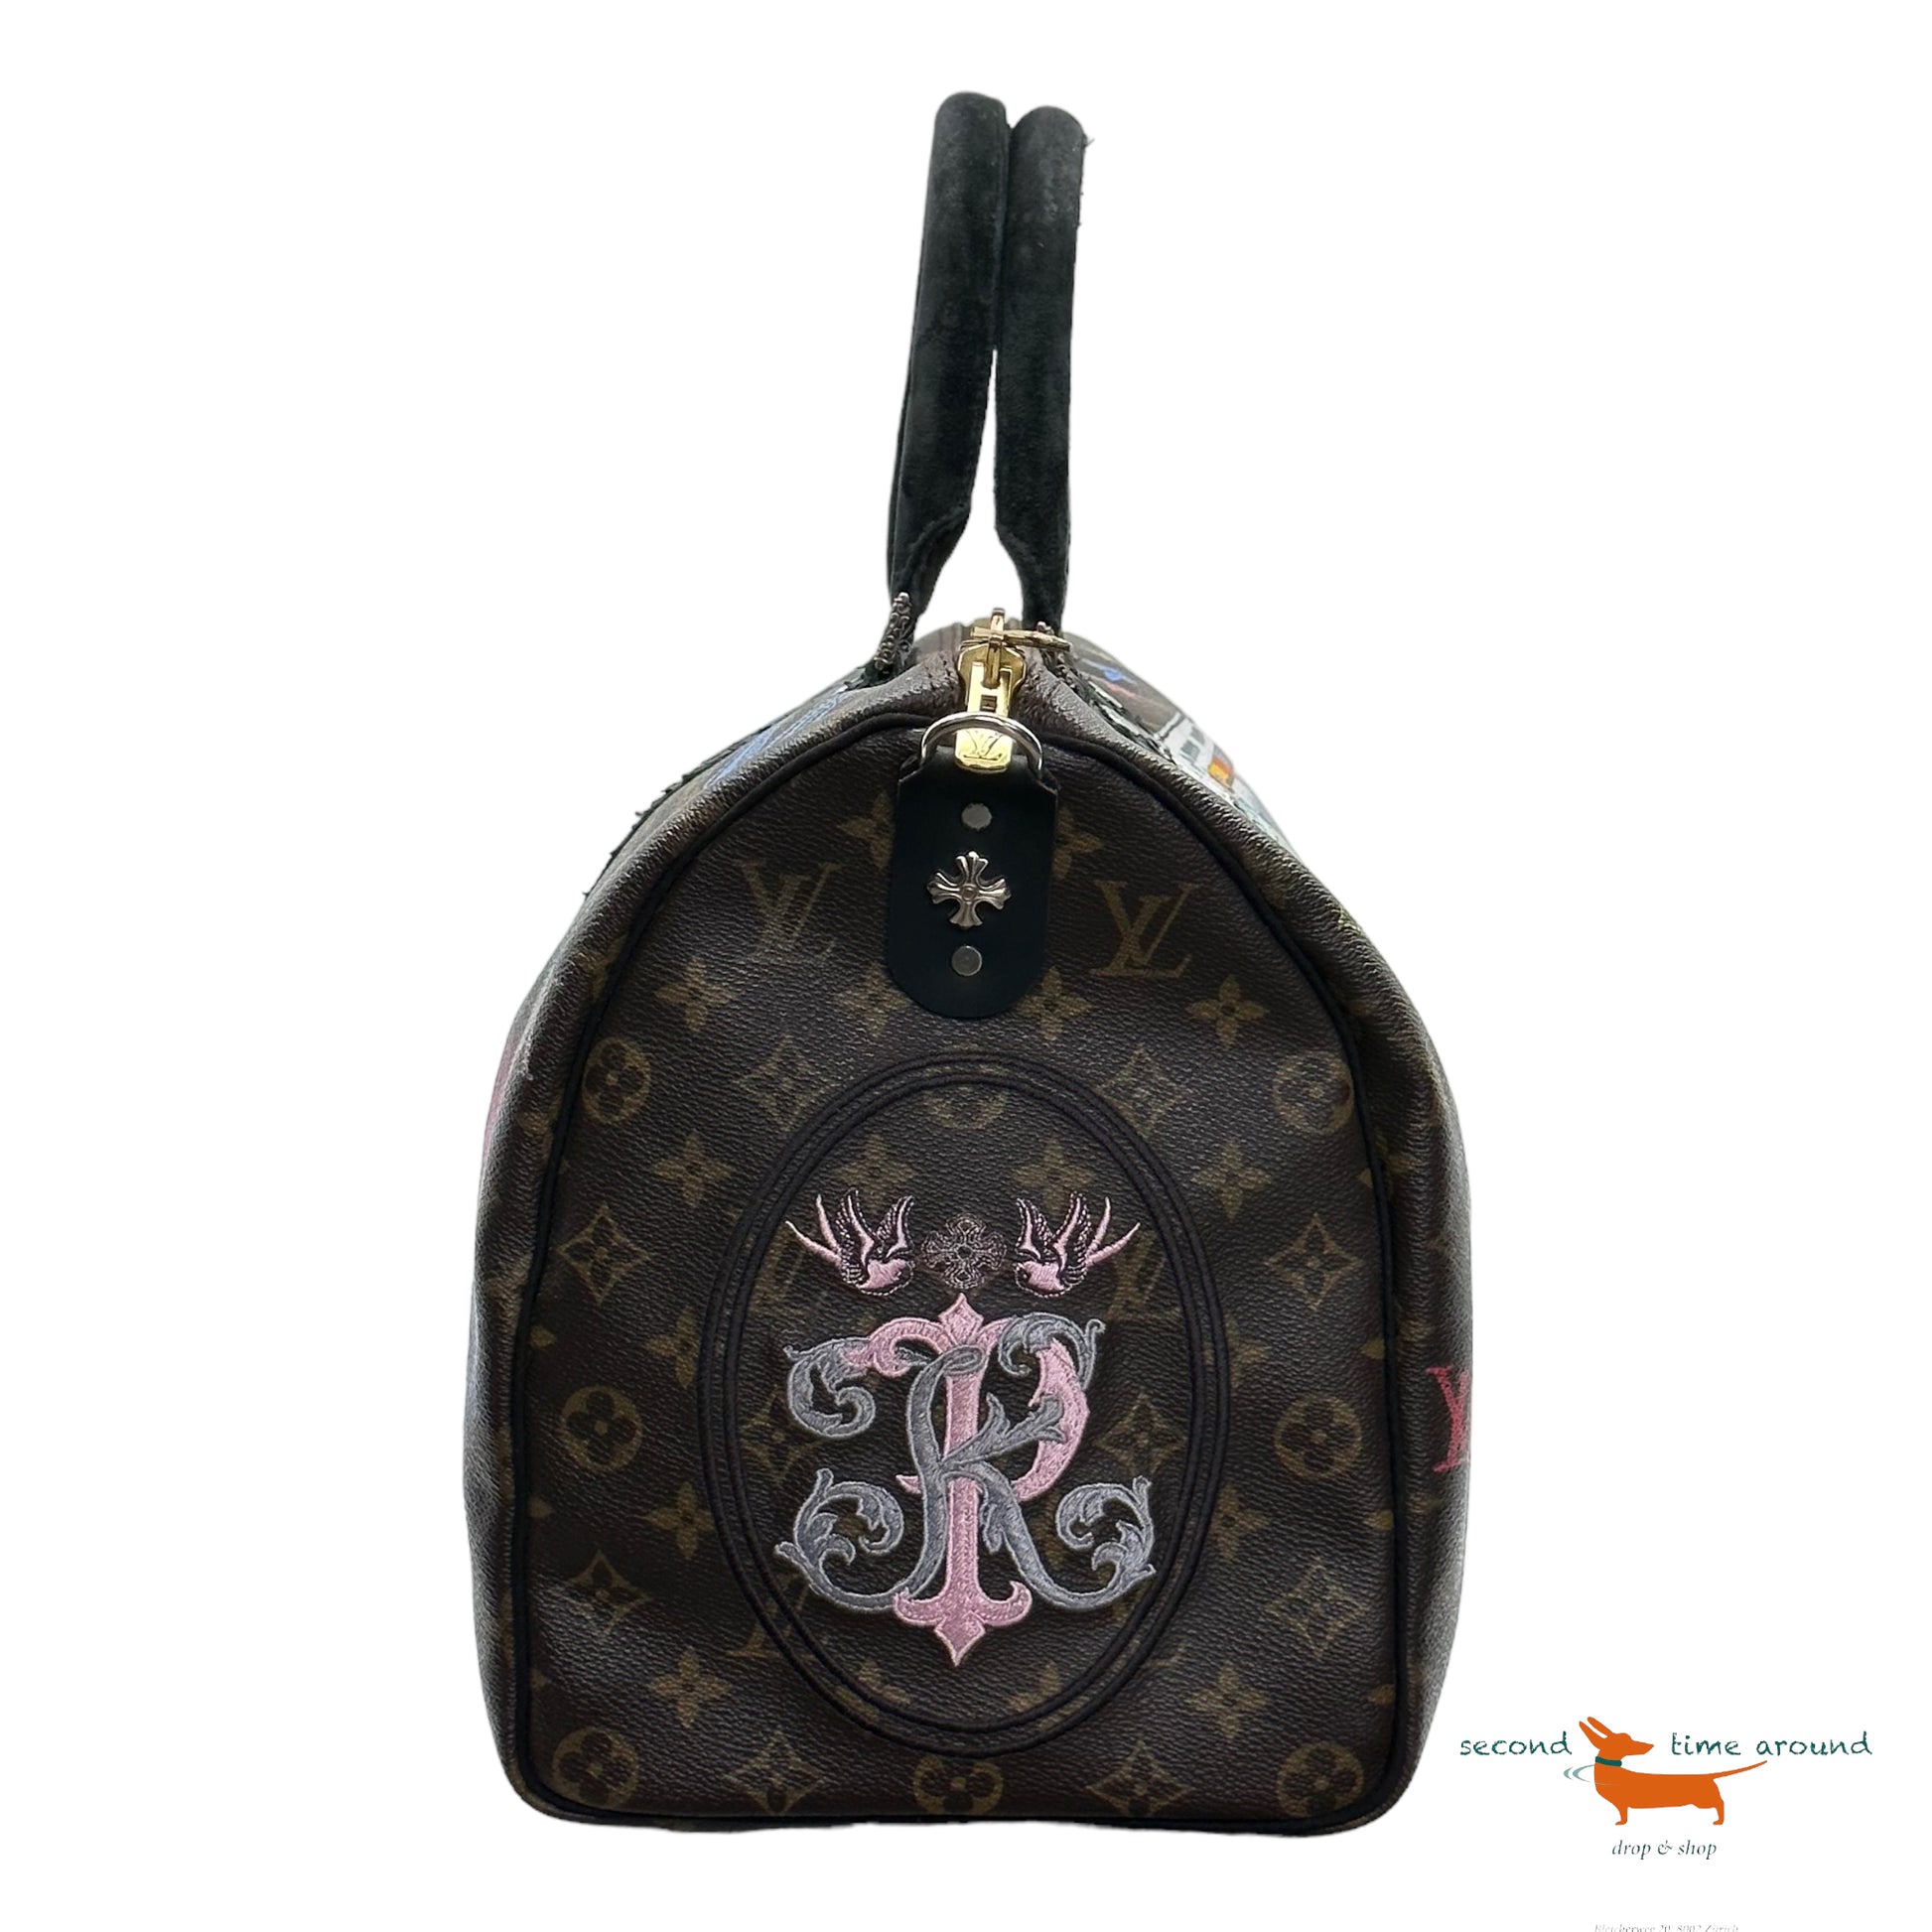 LV Speedy Pluto of Philip Karto - Louis Vuitton customized bag with python  and silver details 40 cm for women